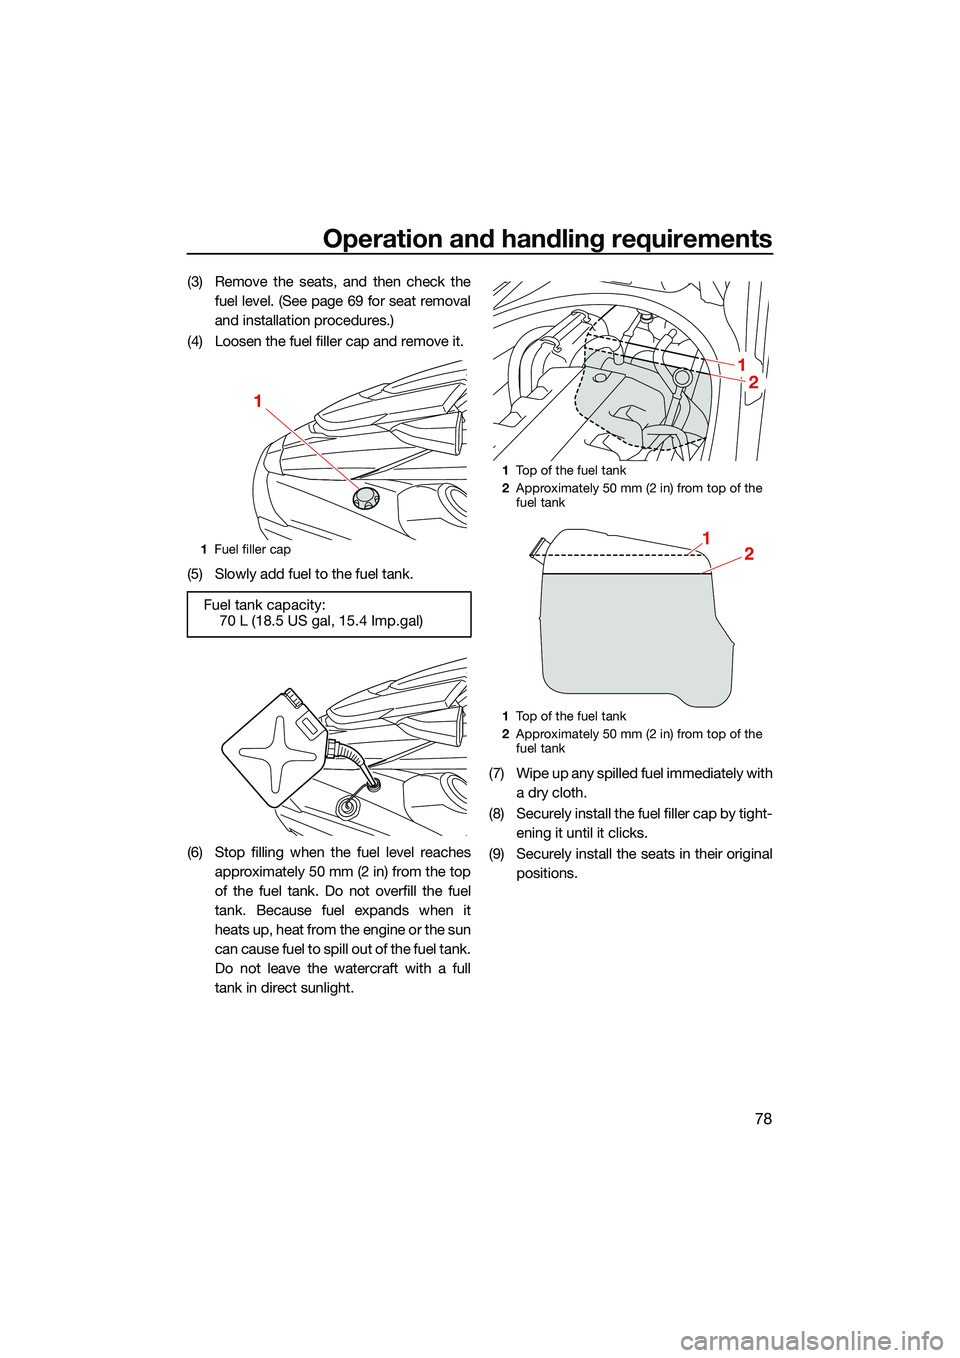 YAMAHA FX HO CRUISER 2022  Owners Manual Operation and handling requirements
78
(3) Remove the seats, and then check thefuel level. (See page 69 for seat removal
and installation procedures.)
(4) Loosen the fuel filler cap and remove it.
(5)